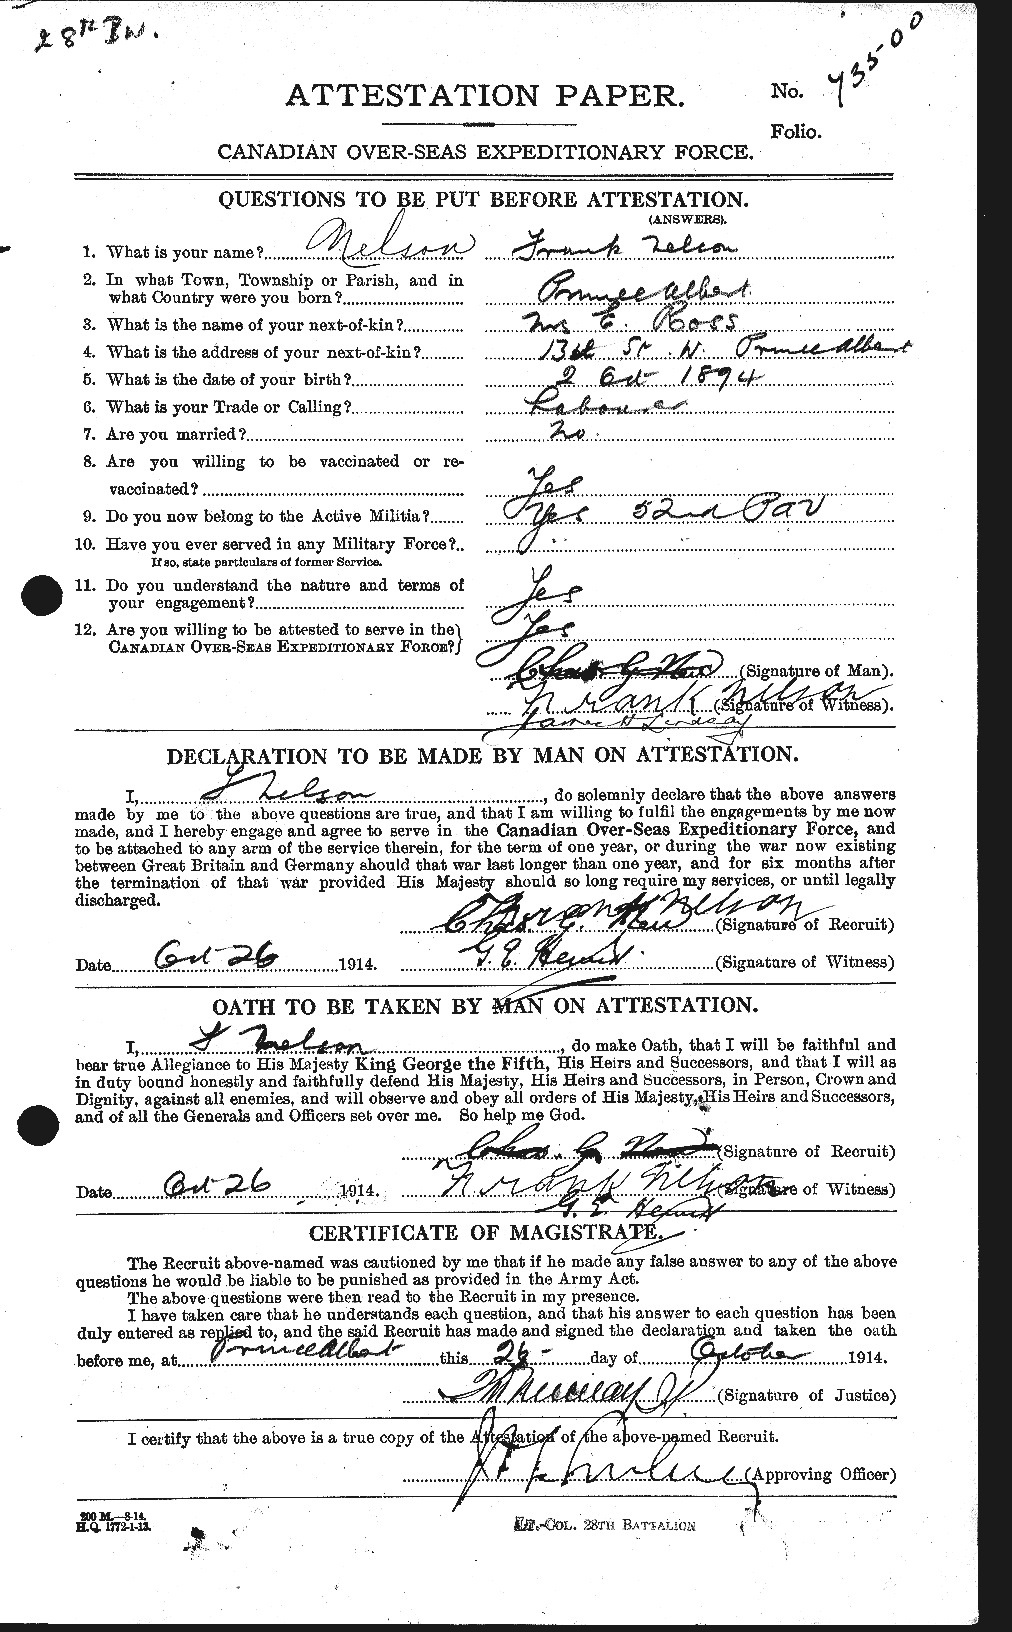 Personnel Records of the First World War - CEF 543760a